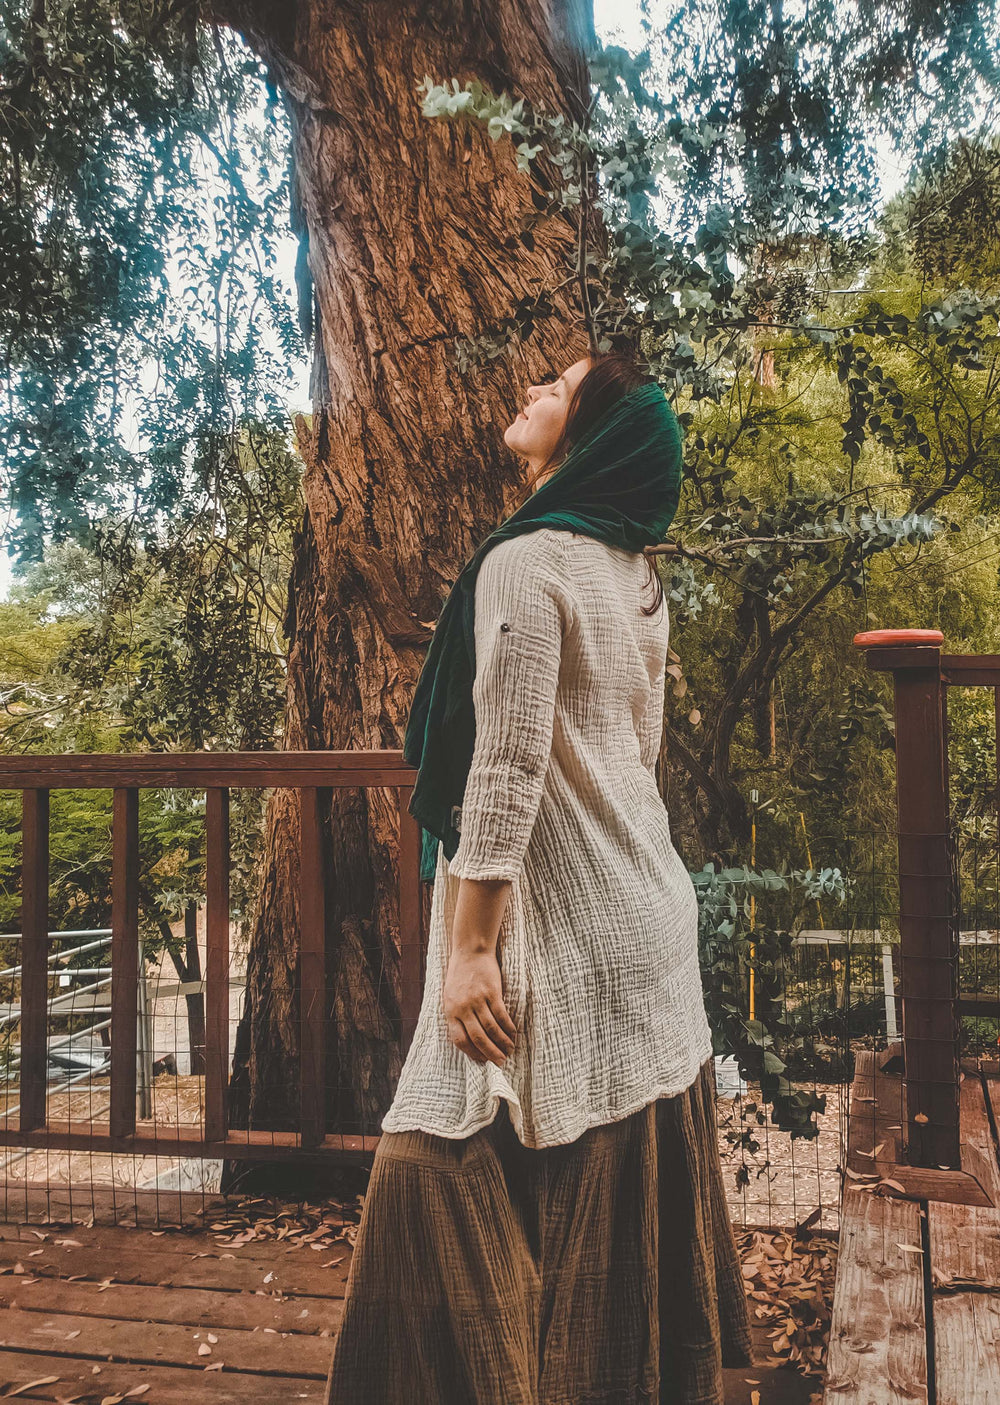 Model has on natural white tunic top over brown maxi skirt. Her hair is covered in a green scarf as she looks to the sky.